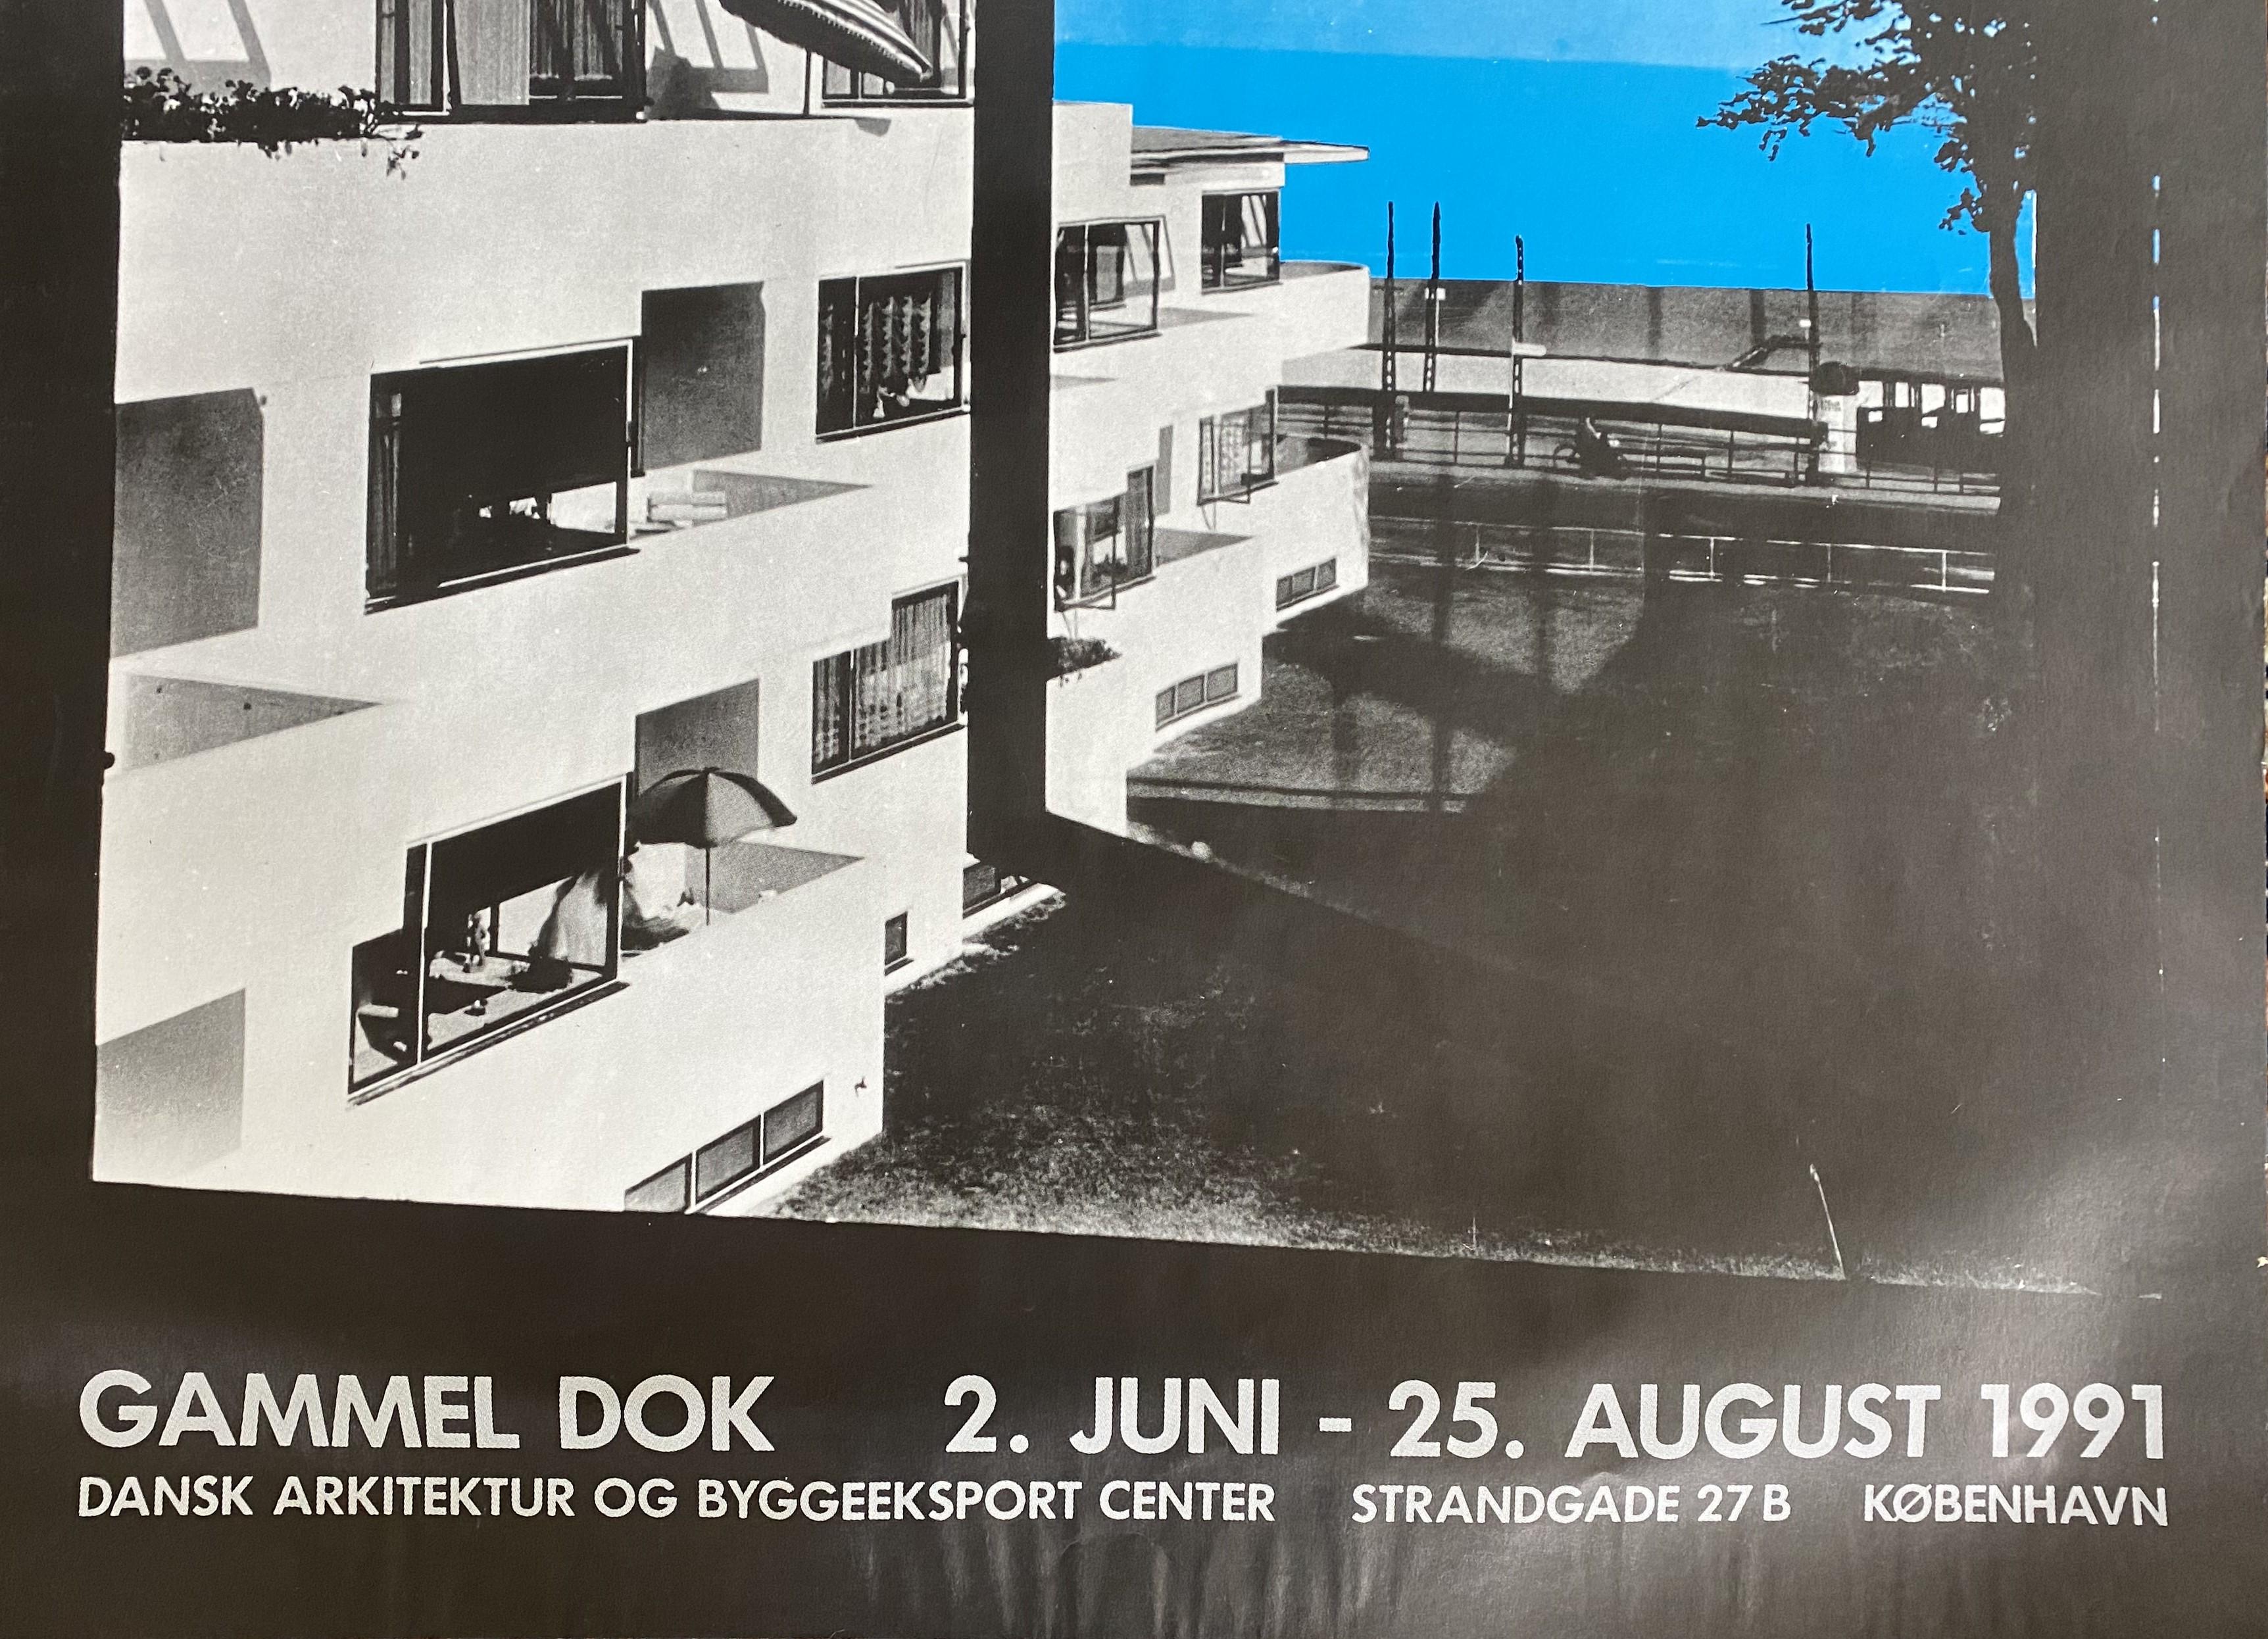 Here is a very rare and desirable vintage exhibition poster by the Danish designer Arne Jacobsen.
The exhibition took place from june 2th - august 25th 1991 at the Gammel Dok, Dansk Arkitektur Og Byggeesport Center, Copenhagen Denmark.

Arne